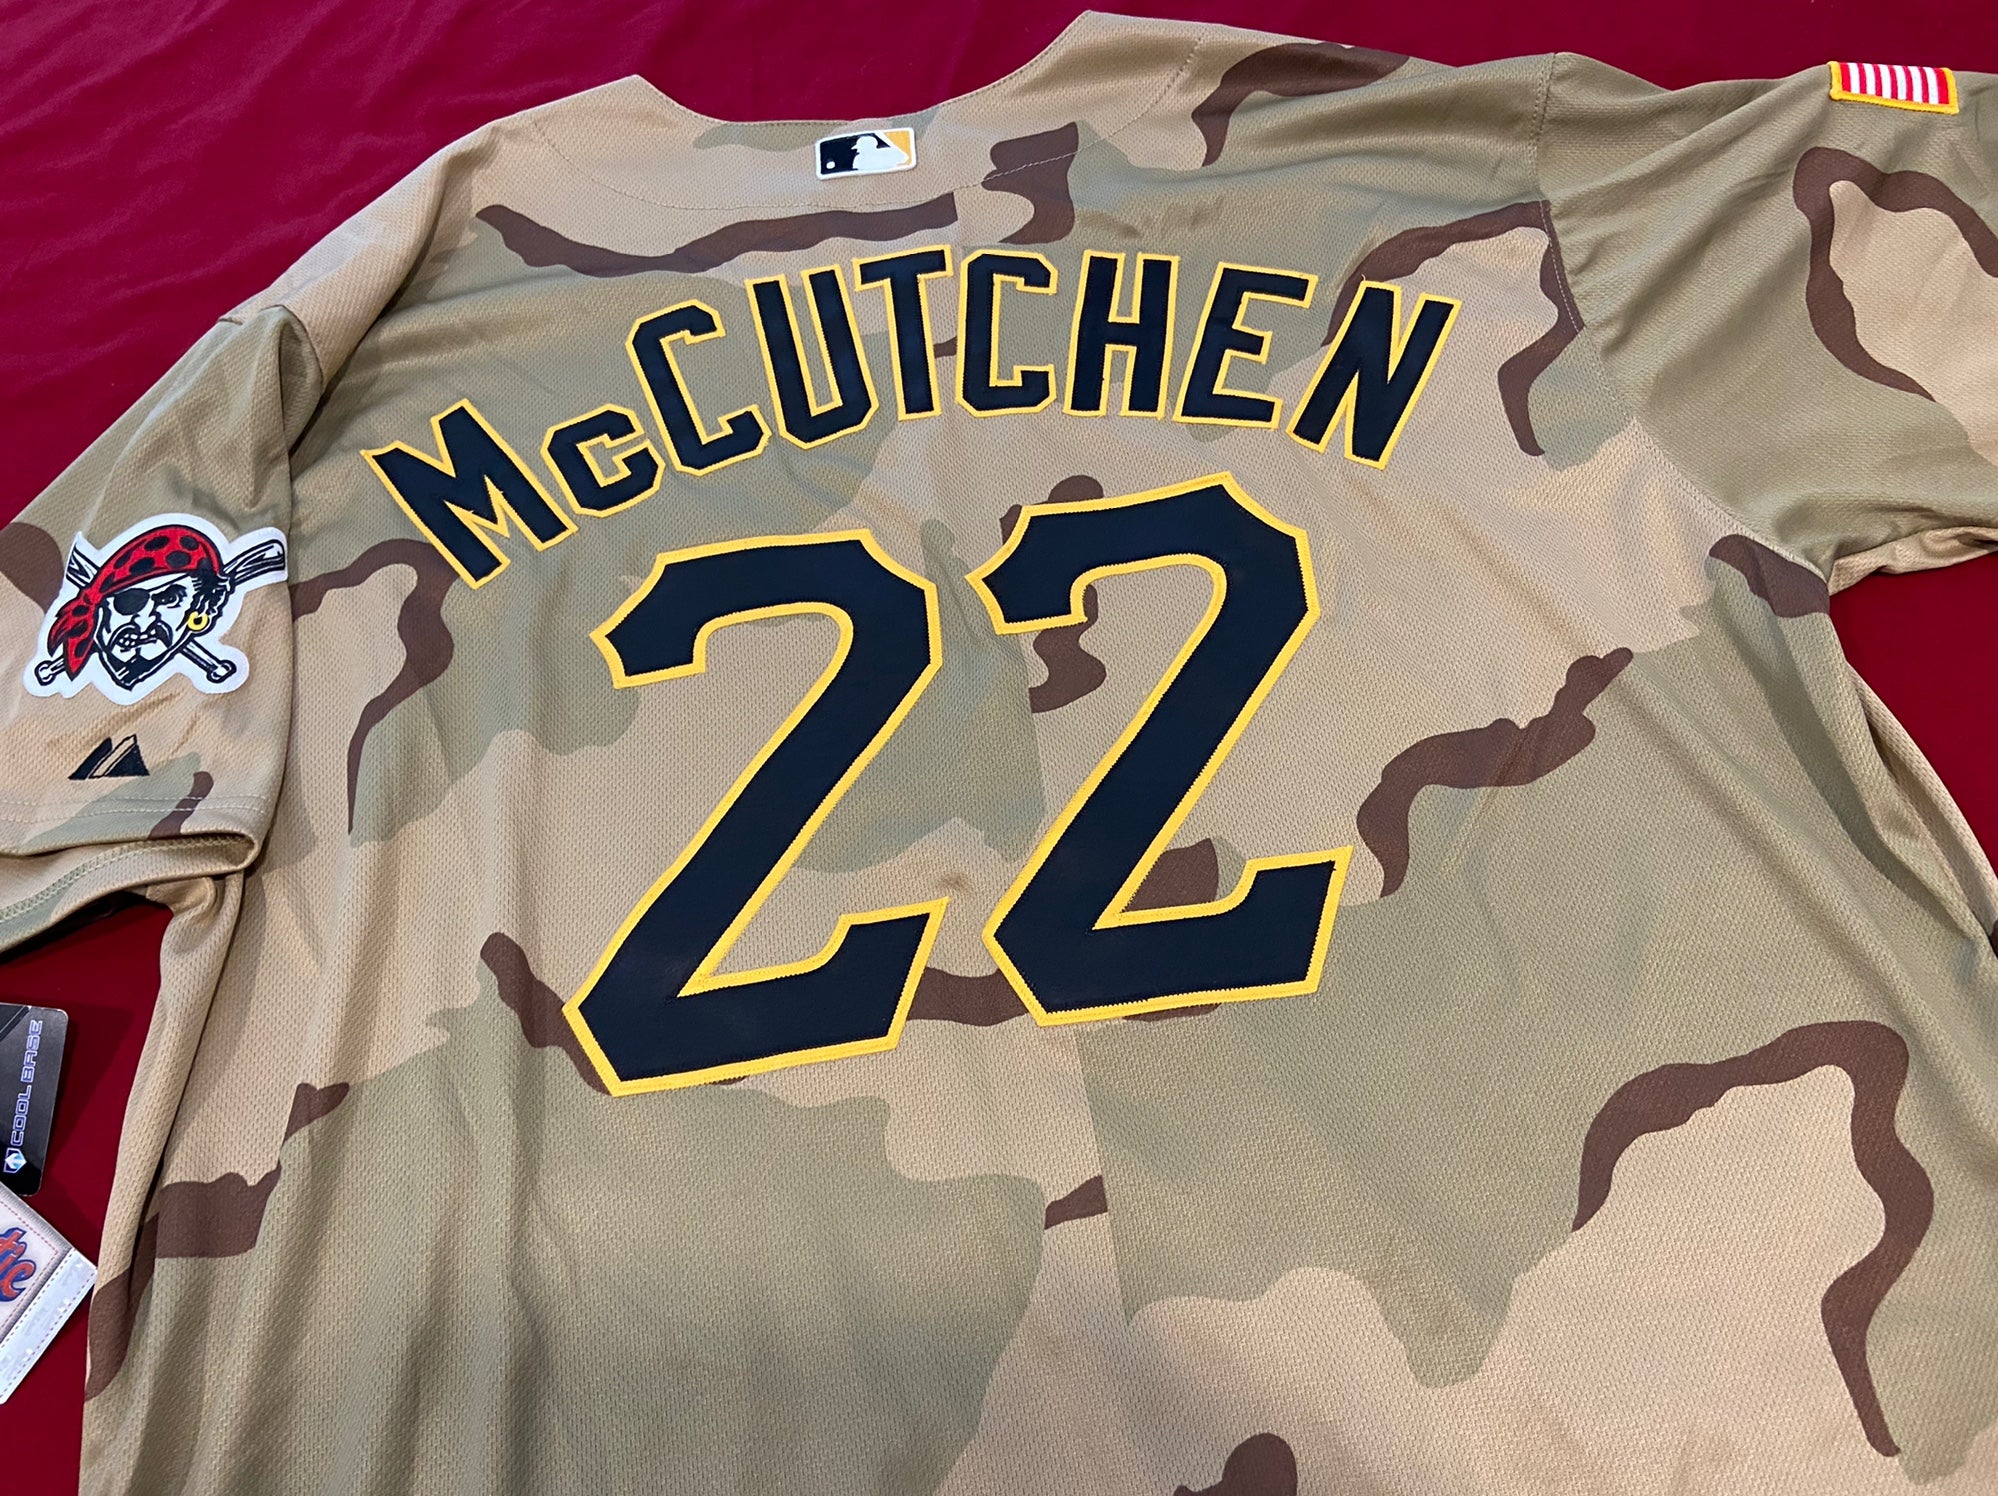 ANDREW McCUTCHEN SIGNED 2012 ALL STAR JERSEY AUTH. MAJESTIC - PITTSBURGH  PIRATES